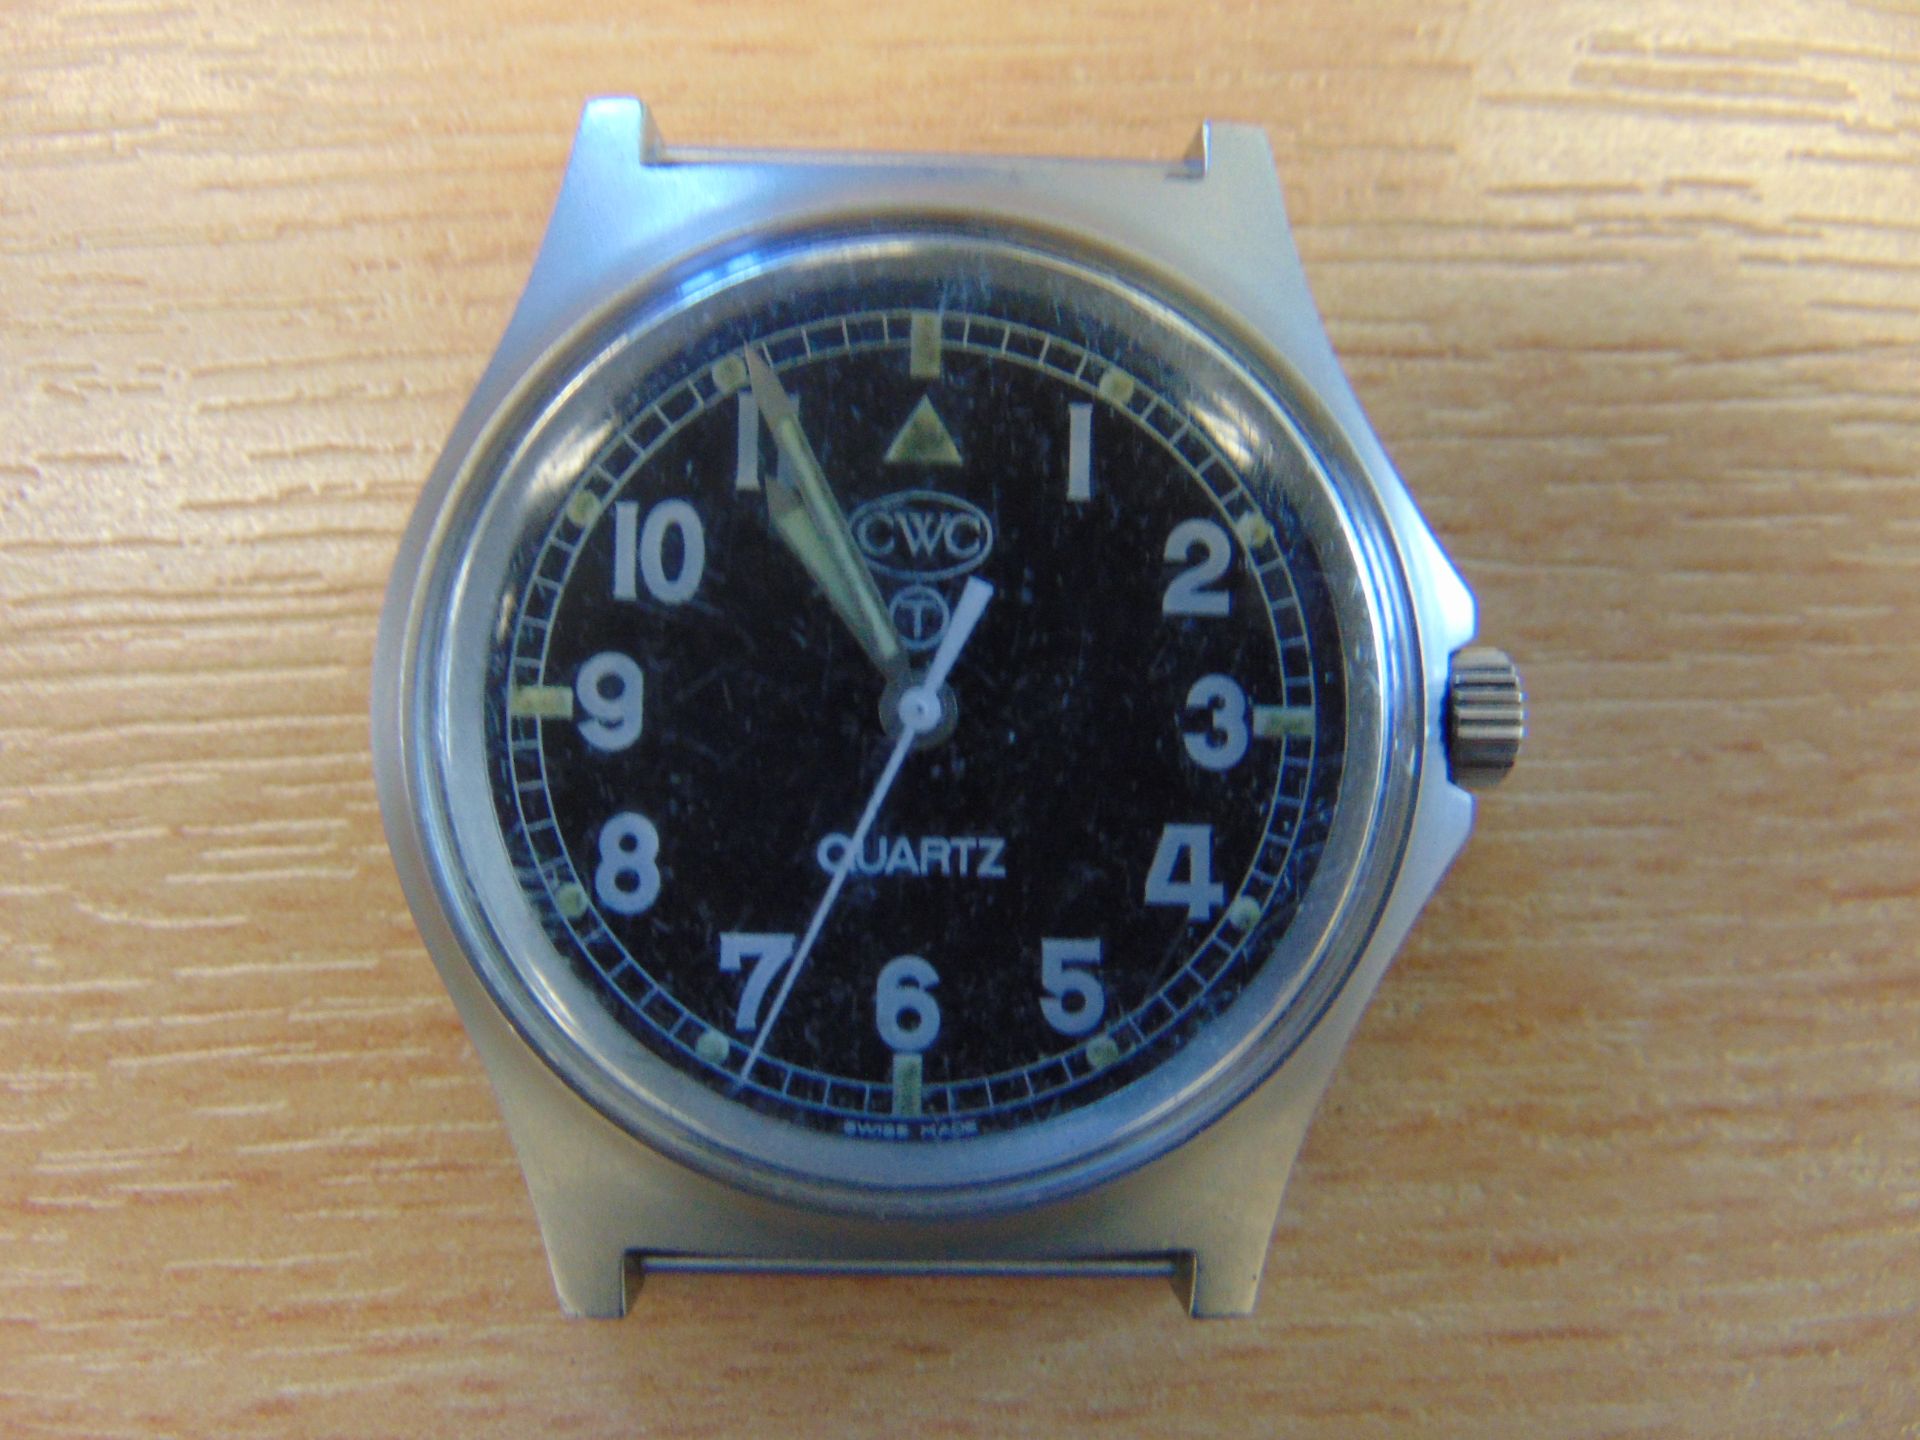 CWC (Cabot Watch Co Switzerland) British Army W10 Service Watch Nato Marks, Low Serial No 849 - Image 3 of 5